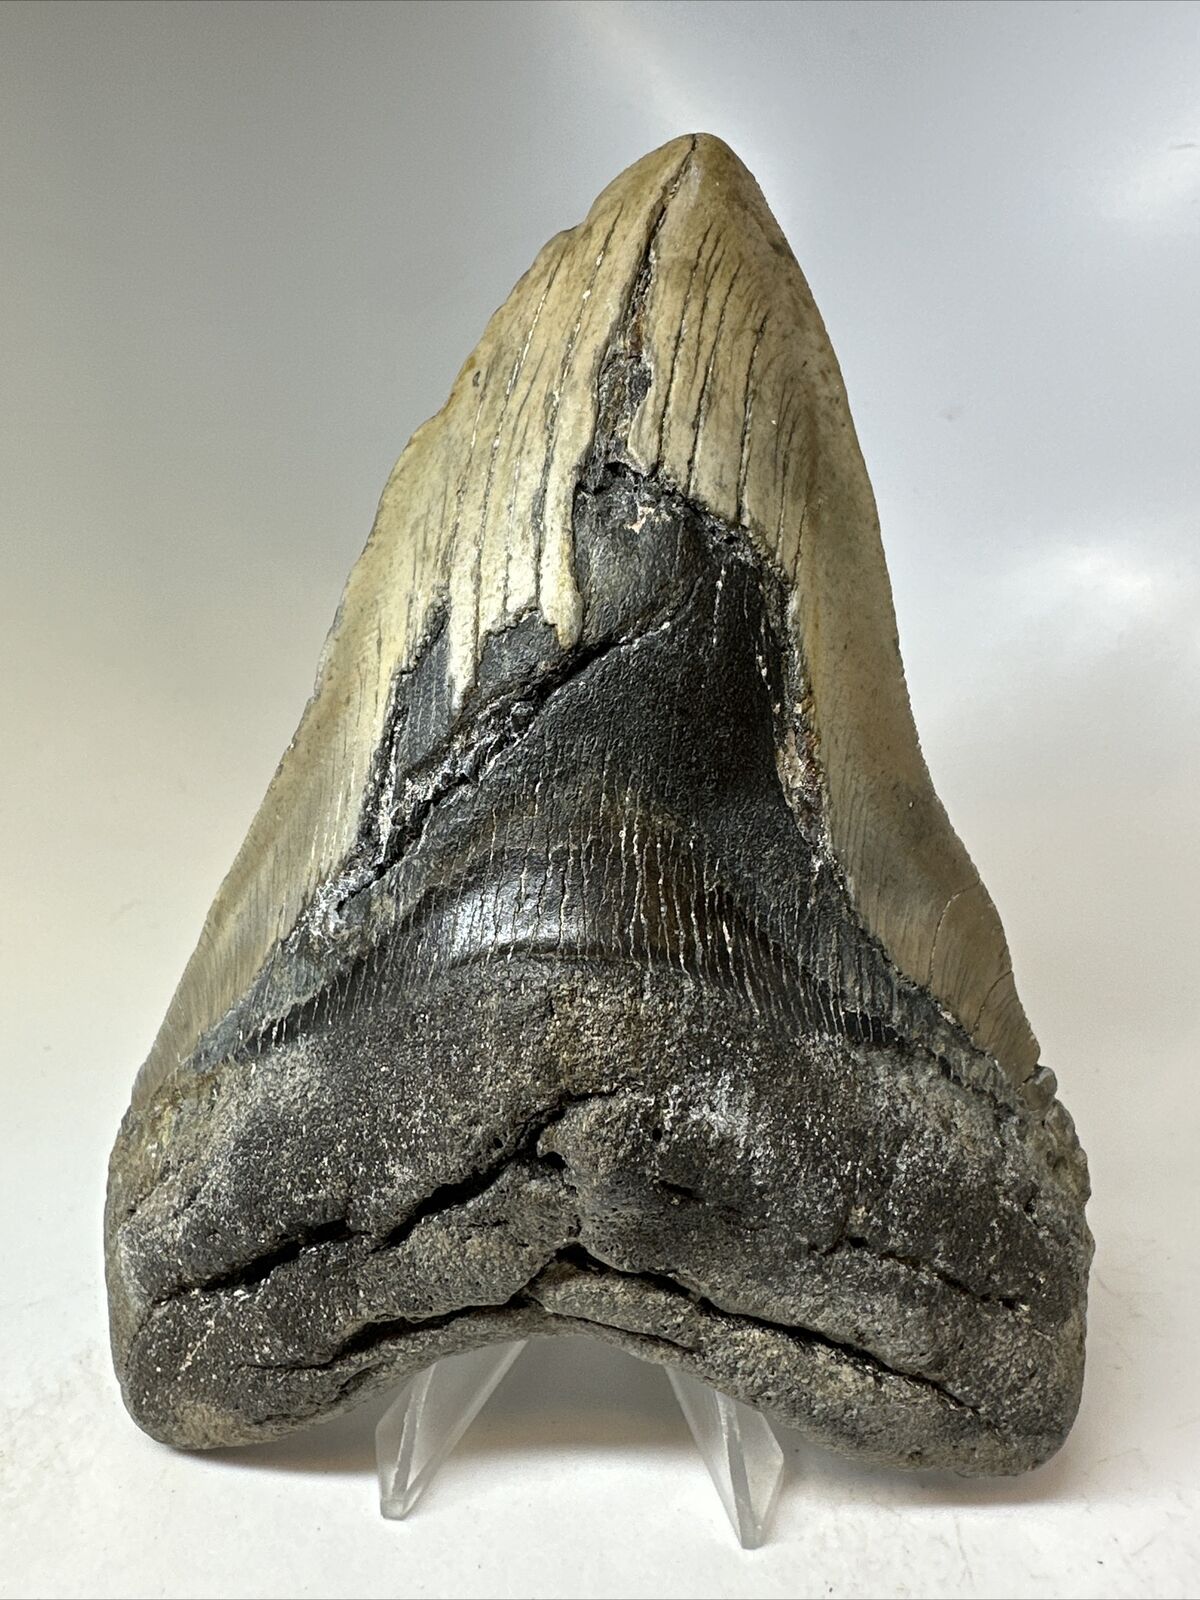 Megalodon Shark Tooth 5.88” Huge - Authentic Fossil - Natural 16120